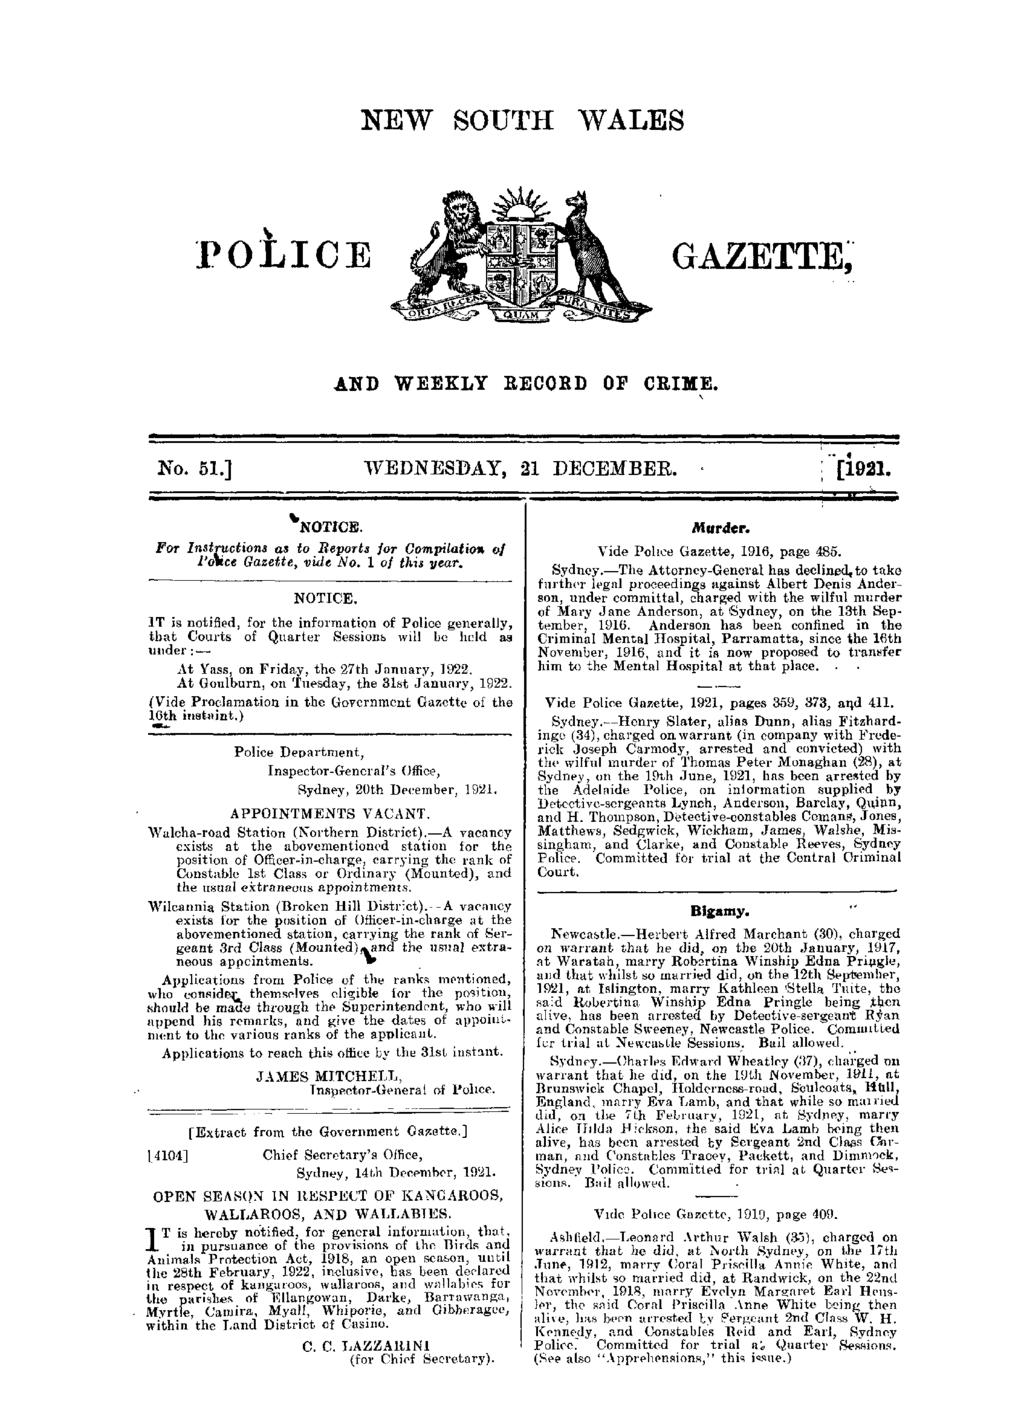 NEW SOUTH WALES POLICE GAZETTE, AND WEEKLY RECORD OF CRIME. N No. 51.] WEDNESDAY, 21 DECEMBER. [1921. NOTICE. For Instructions as to Reports f or Compilation of Police Gazette, vide No.